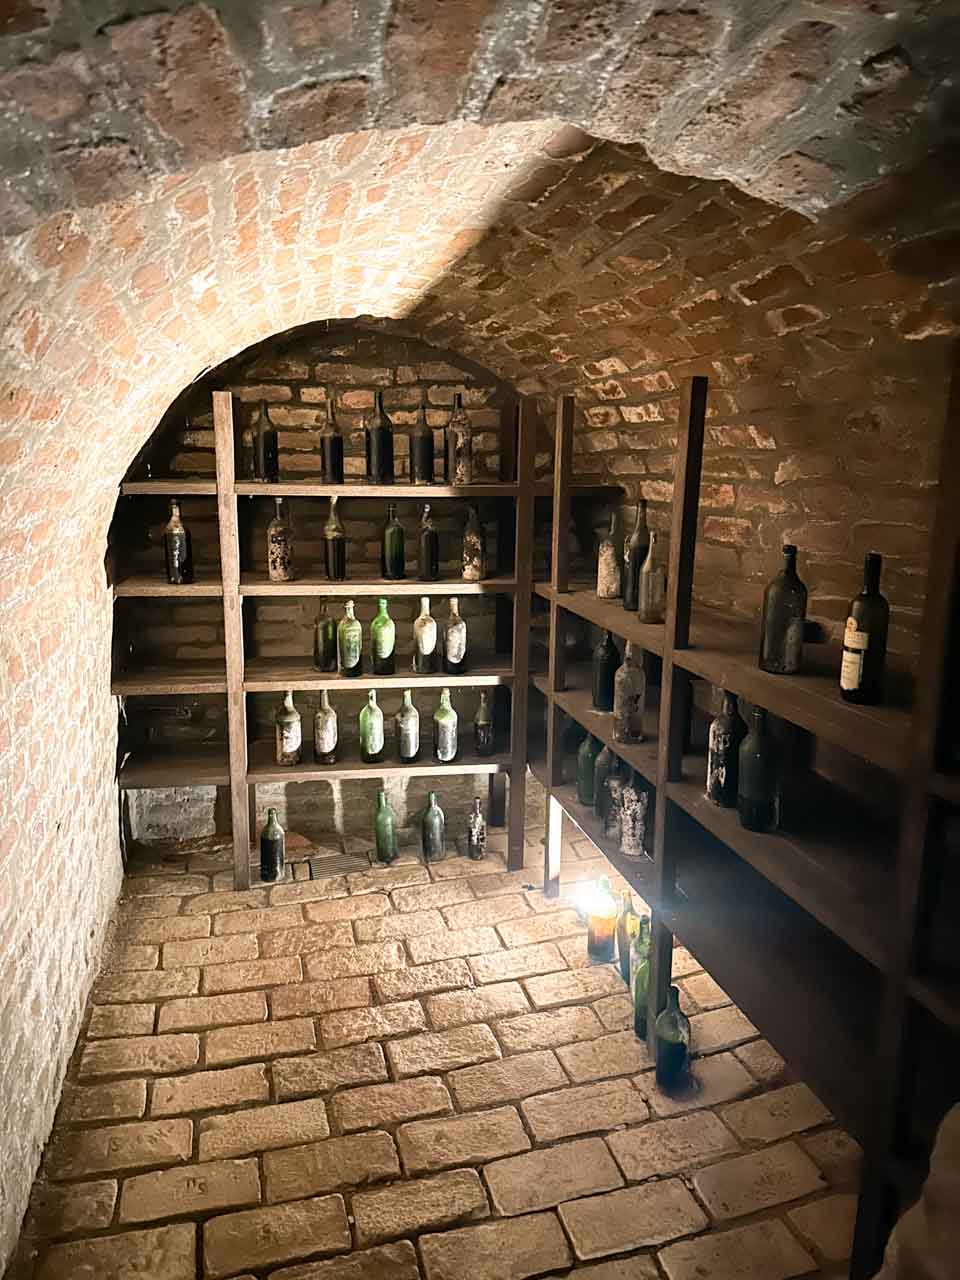 Brick wine cellar with vintage bottles on wooden shelves under an arch in the Labyrinth under the Vegetable Market in Brno, Czech Republic